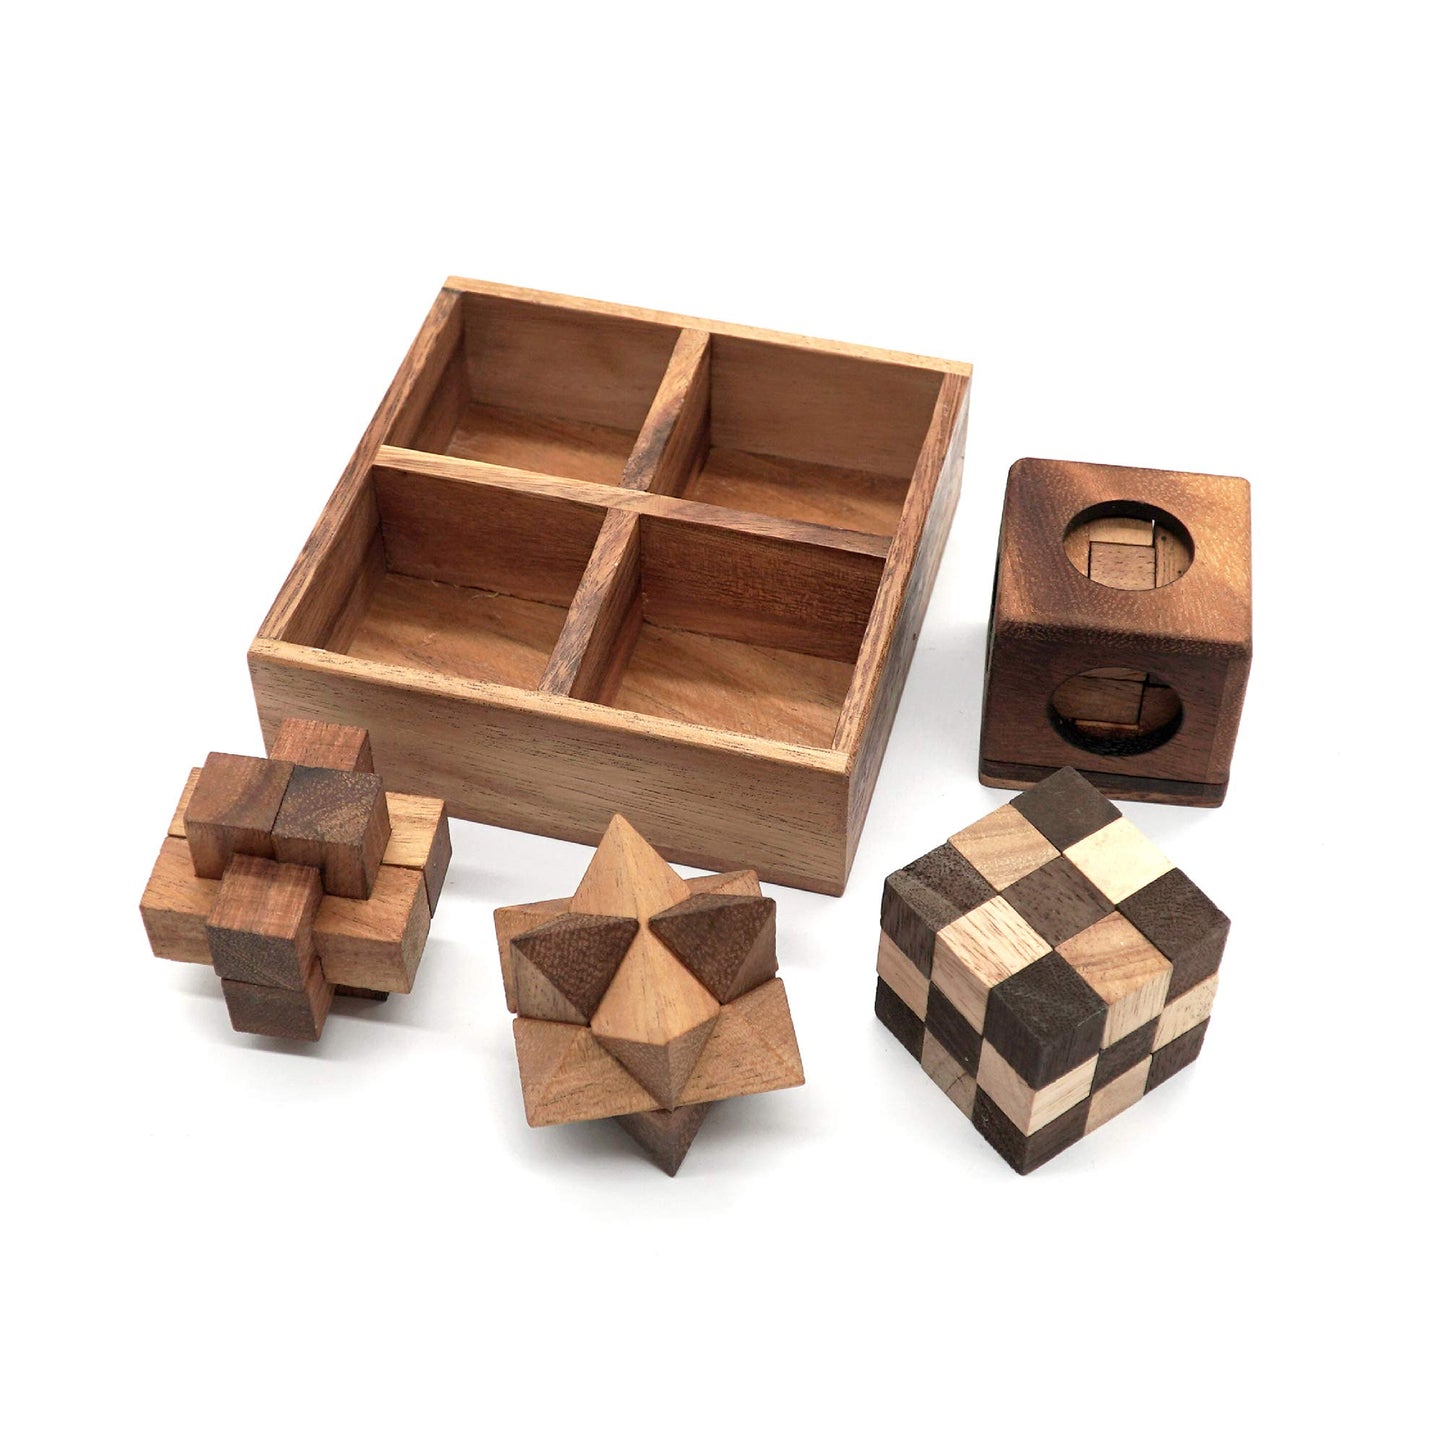 BSIRI Wooden Puzzle Box Set (4 Games) - Challenging Brain Teasers 3D Puzzles for Adults, Interlocking Games for IQ Test. Ideal for Rustic Patio Decor, Unique Gift for Christmas and Birthdays